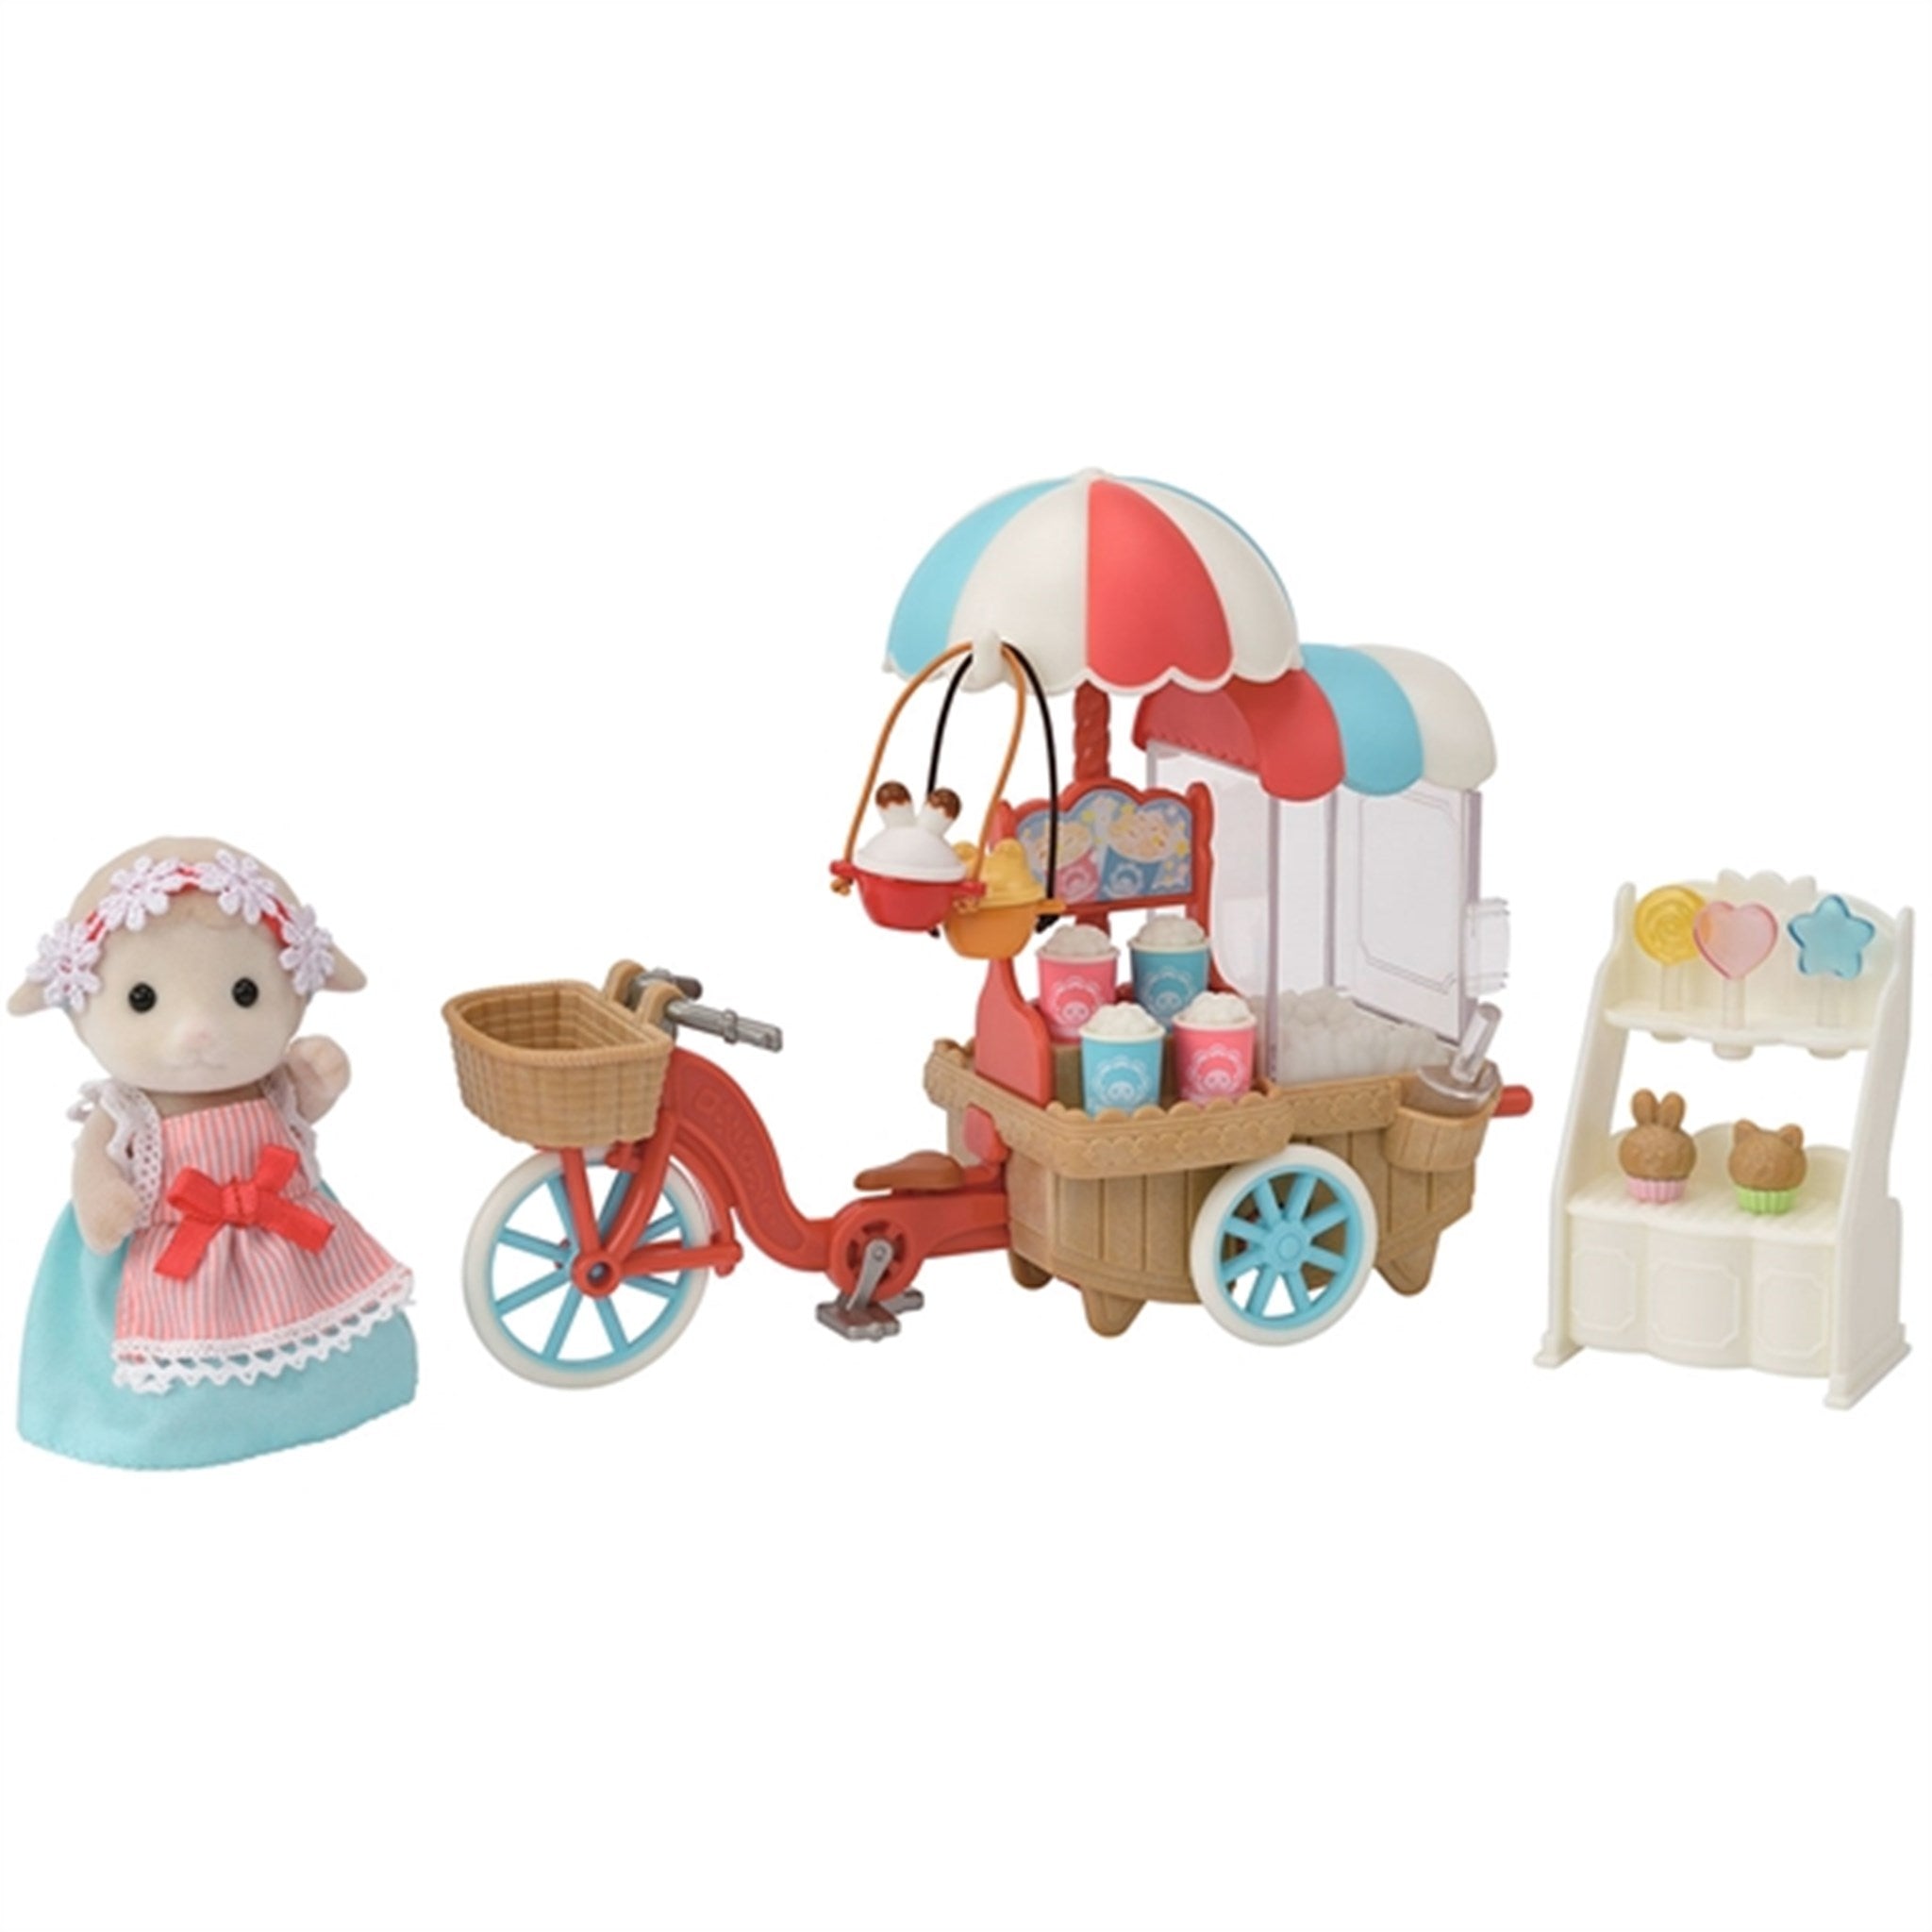 Sylvanian Families® Popcorn Delivery Service With Figur 5